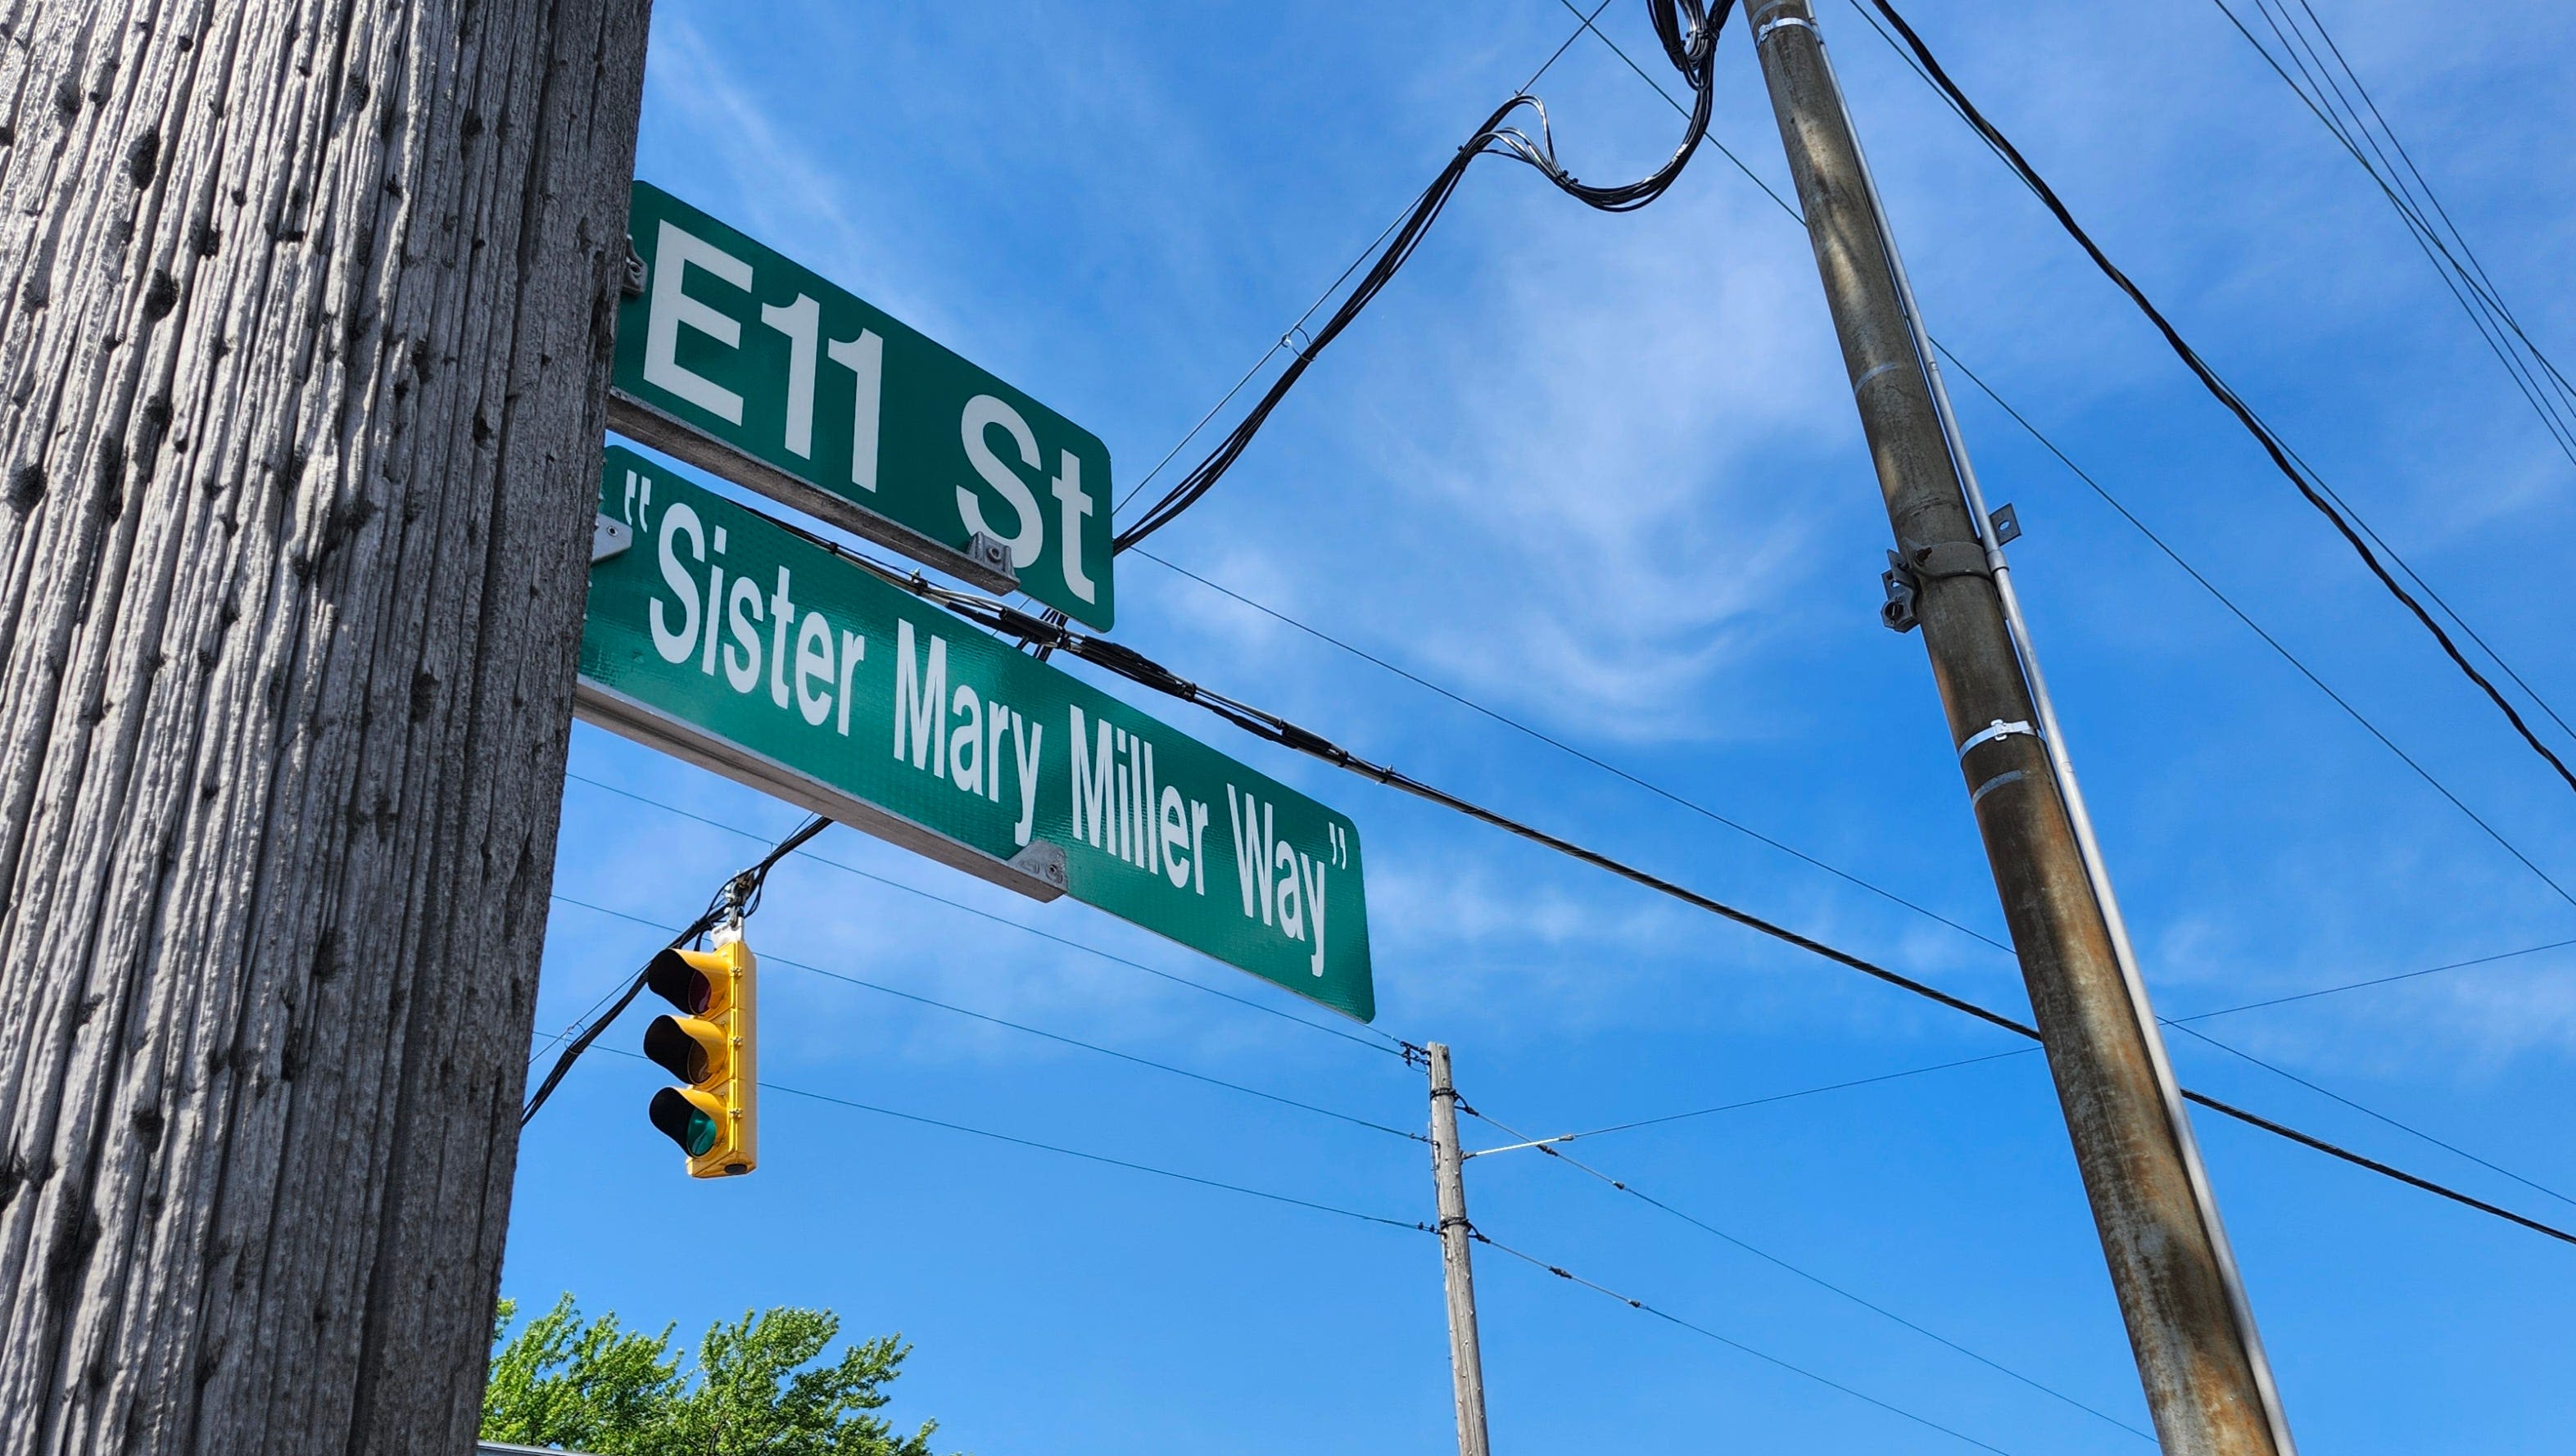 What we can learn from Erie Sister Mary Miller's 'Way' - memorialized in a new street sign